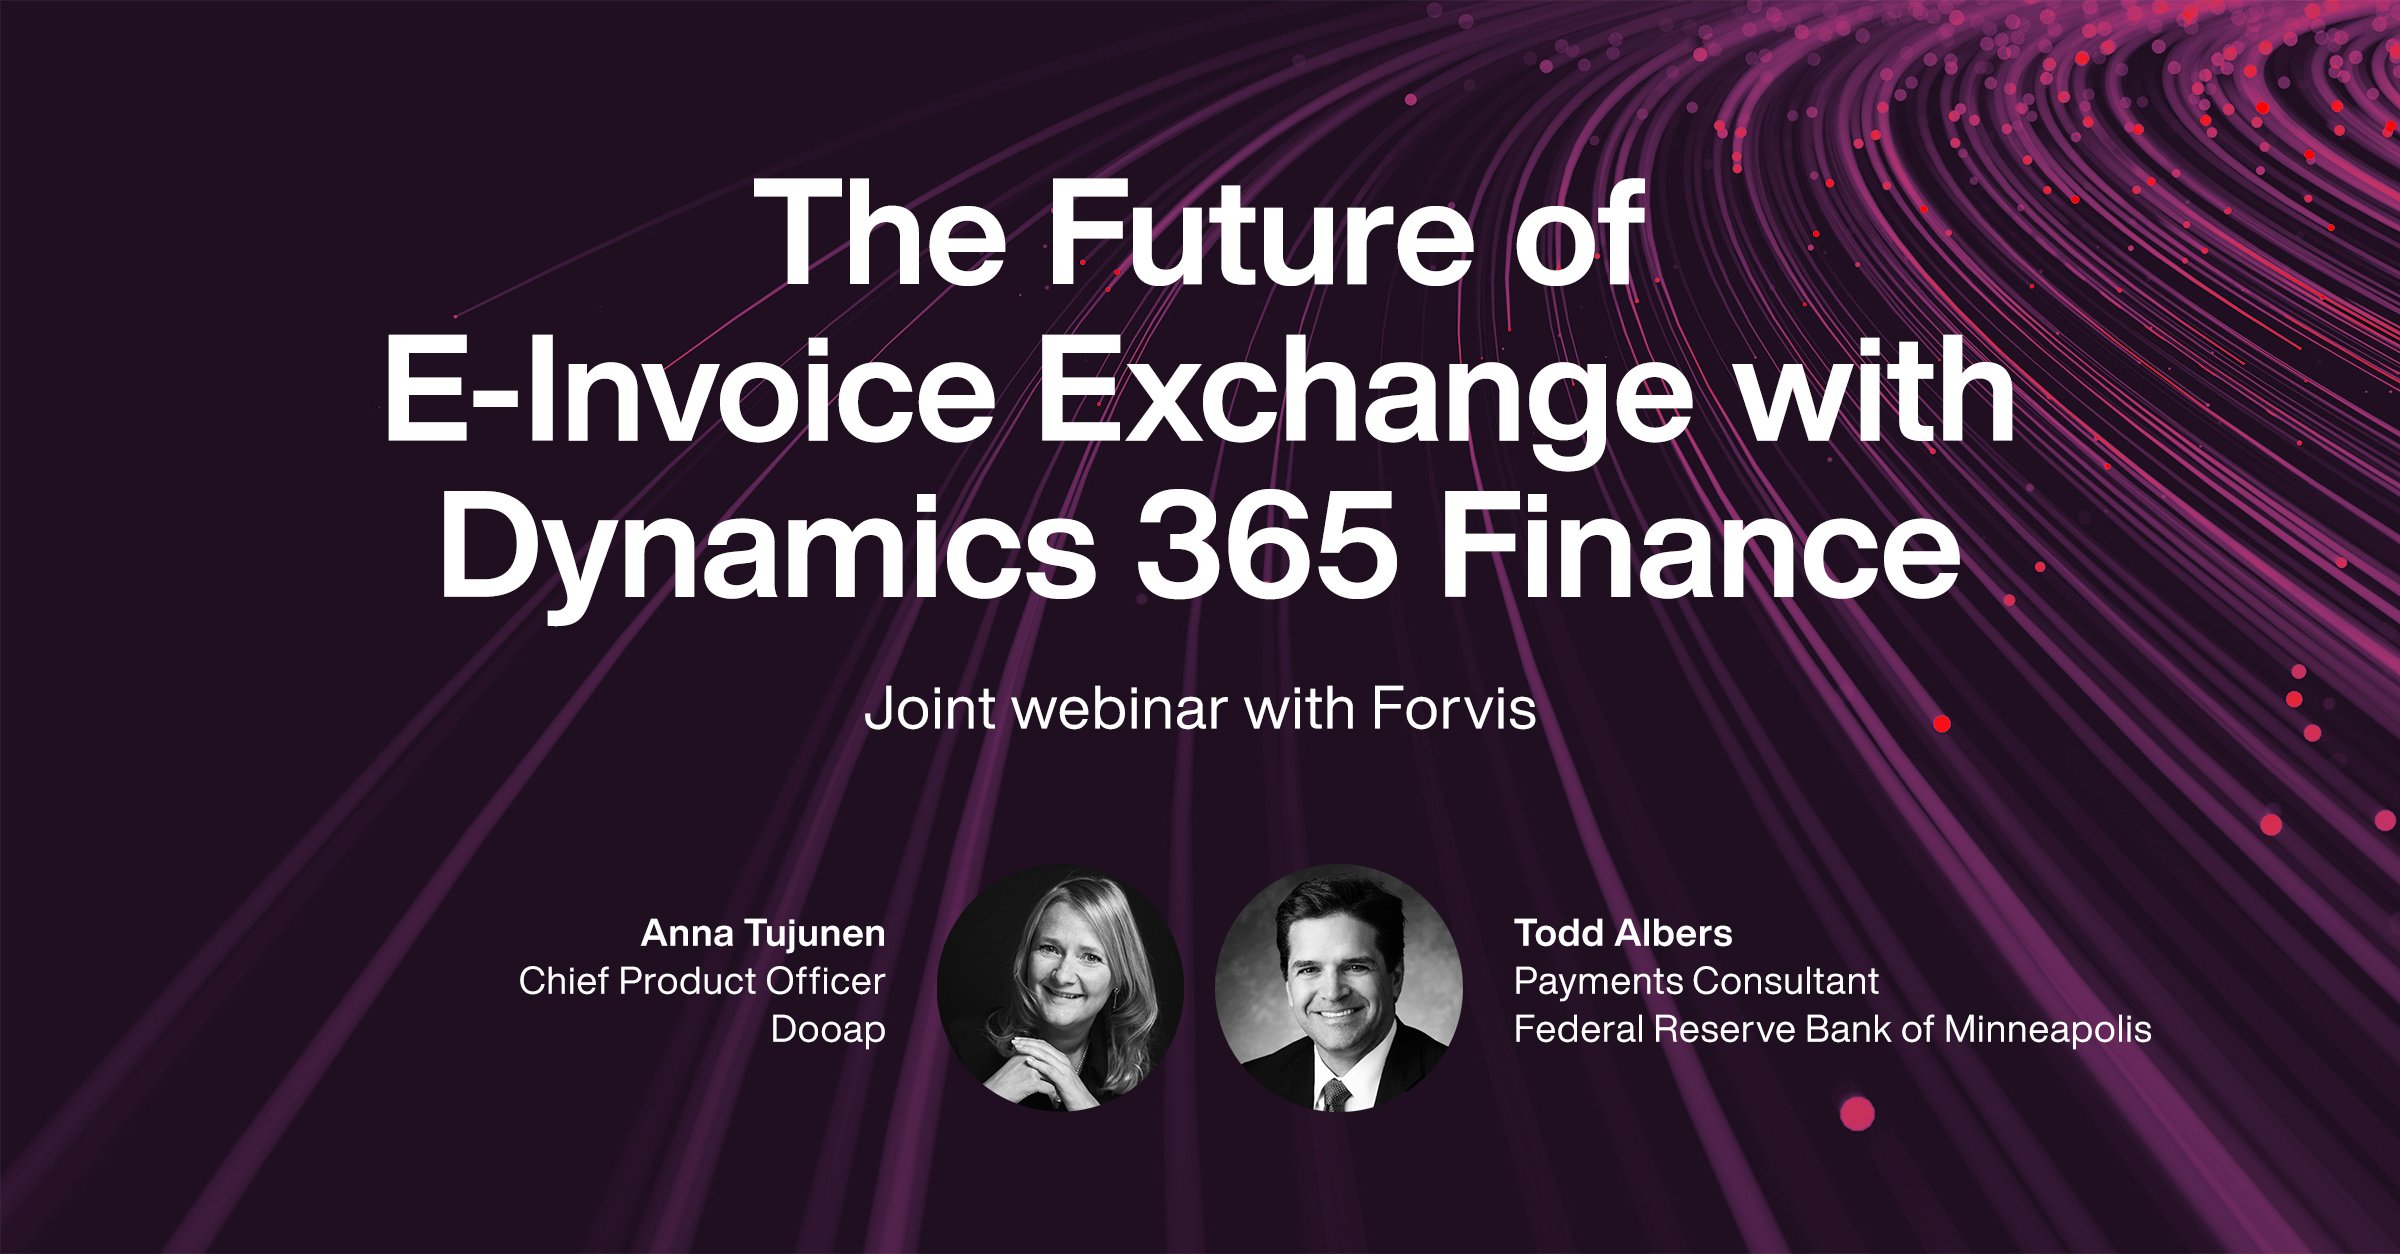 The Future of E-Invoice Exchange with Dynamics 365 Finance